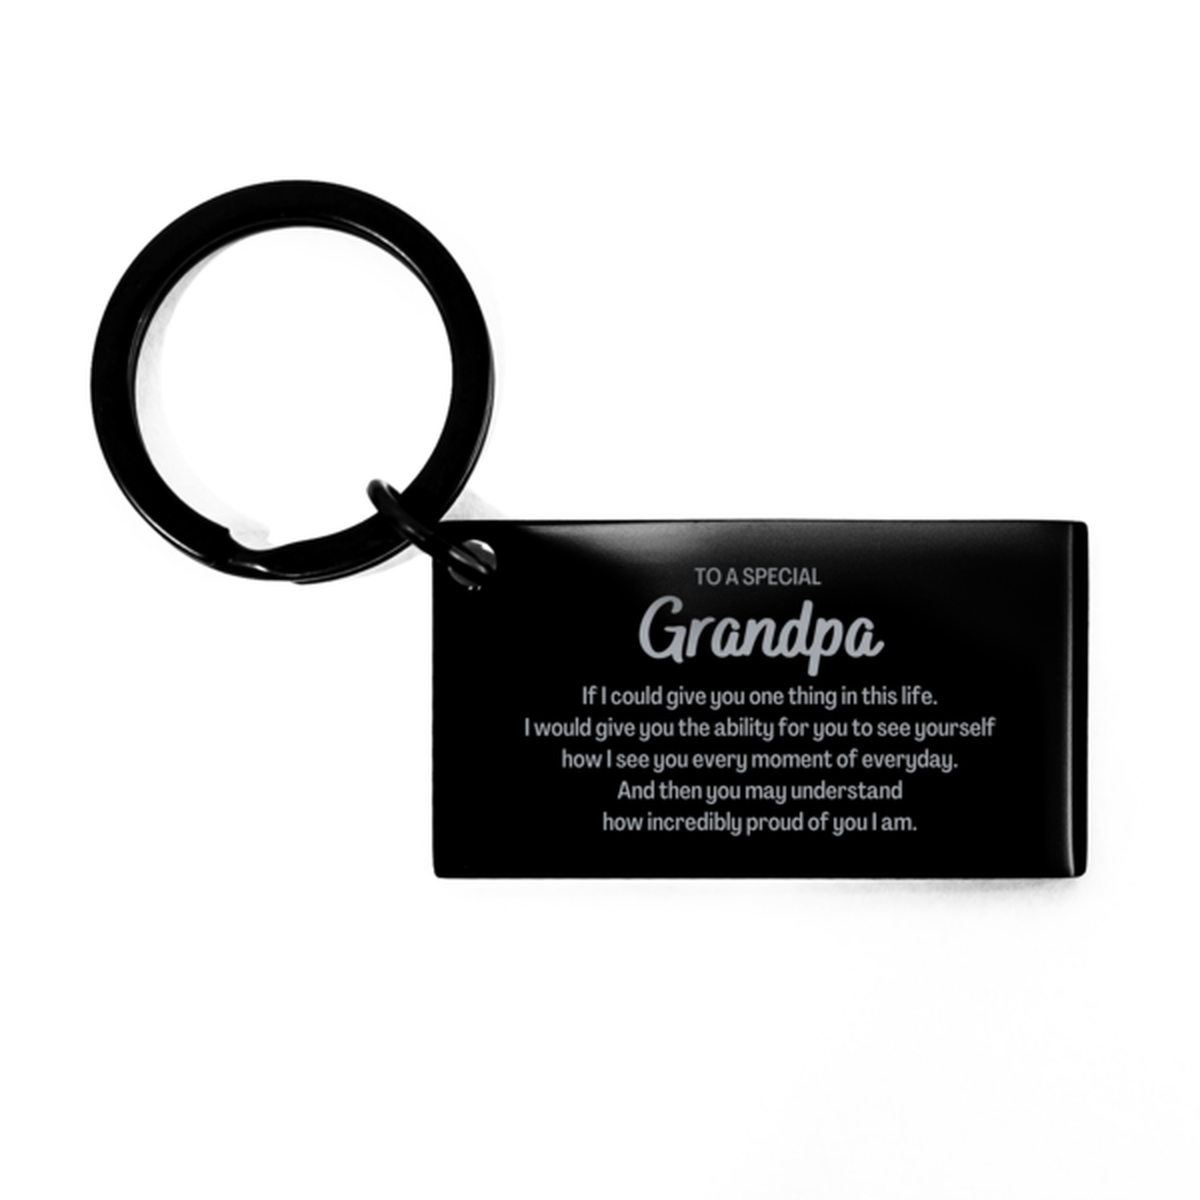 To My Grandpa Keychain, Gifts For Grandpa Engraved, Inspirational Gifts for Christmas Birthday, Epic Gifts for Grandpa To A Special Grandpa how incredibly proud of you I am